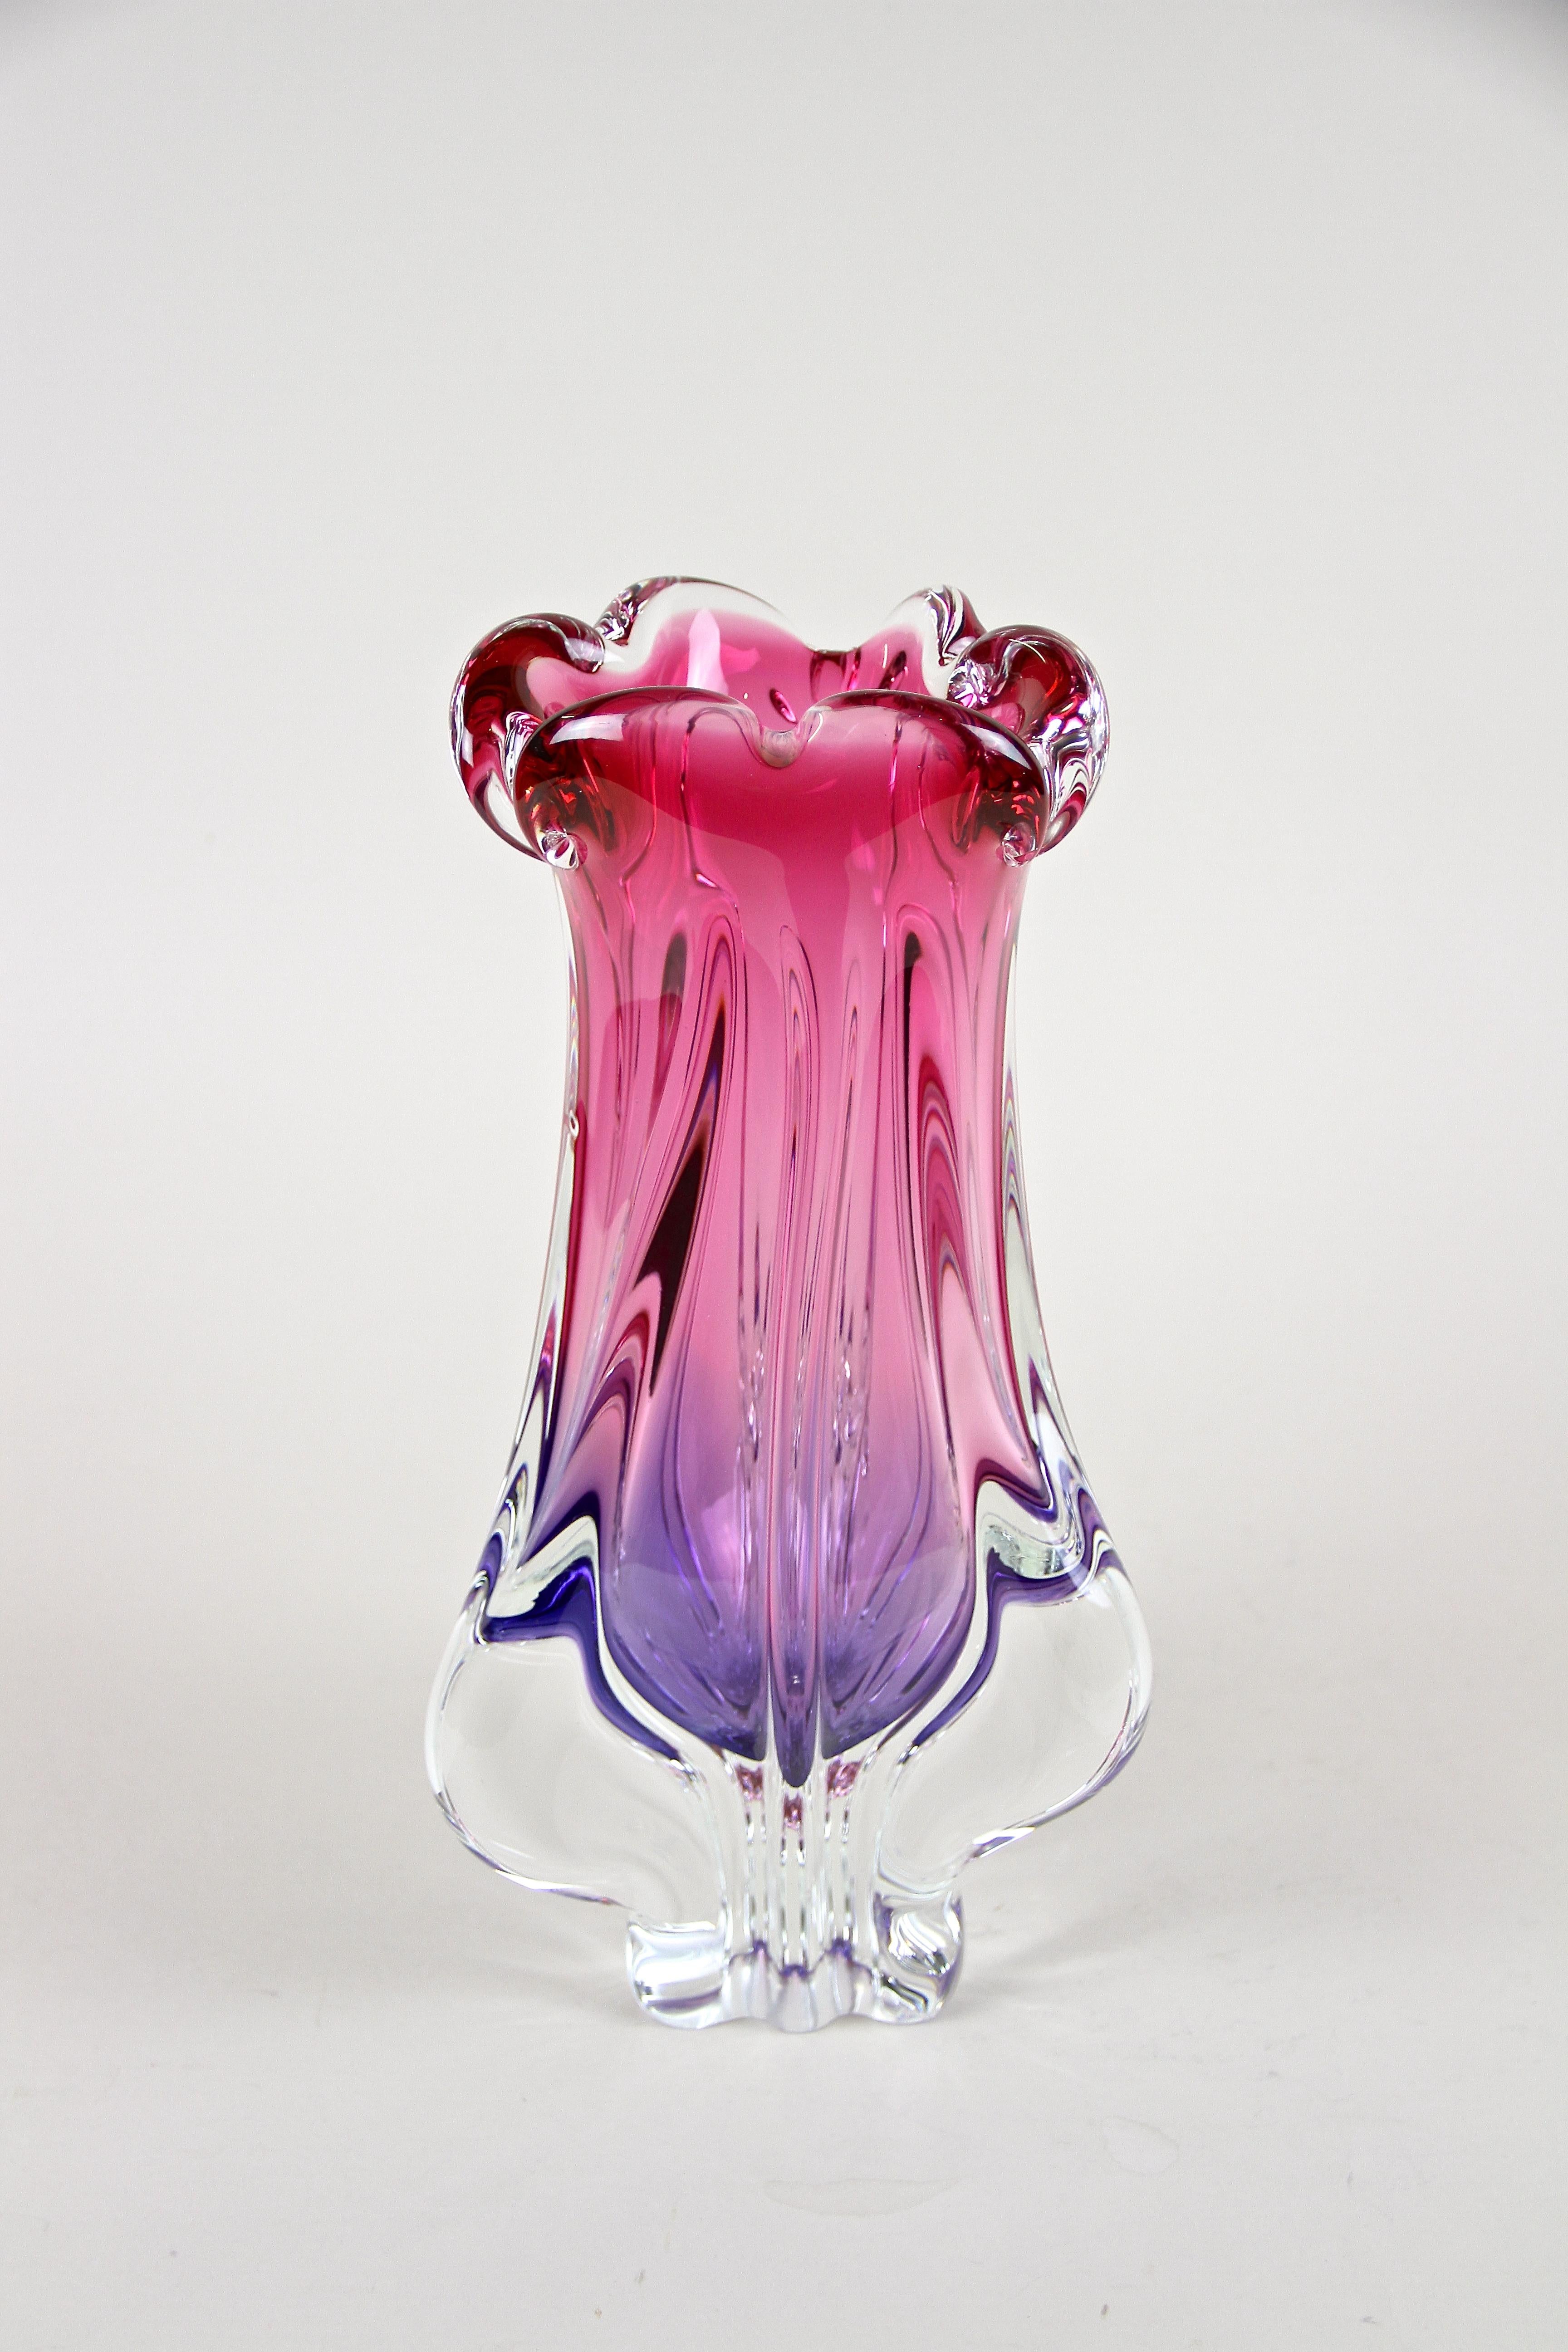 Beautifully colored mid-century Murano glass vase from the workshops of Sommerso in Venetia. Artfully hand crafted around the 1960/70s on the island of Murano, this incredible looking piece of glass art impresses with its one of a kind coloration